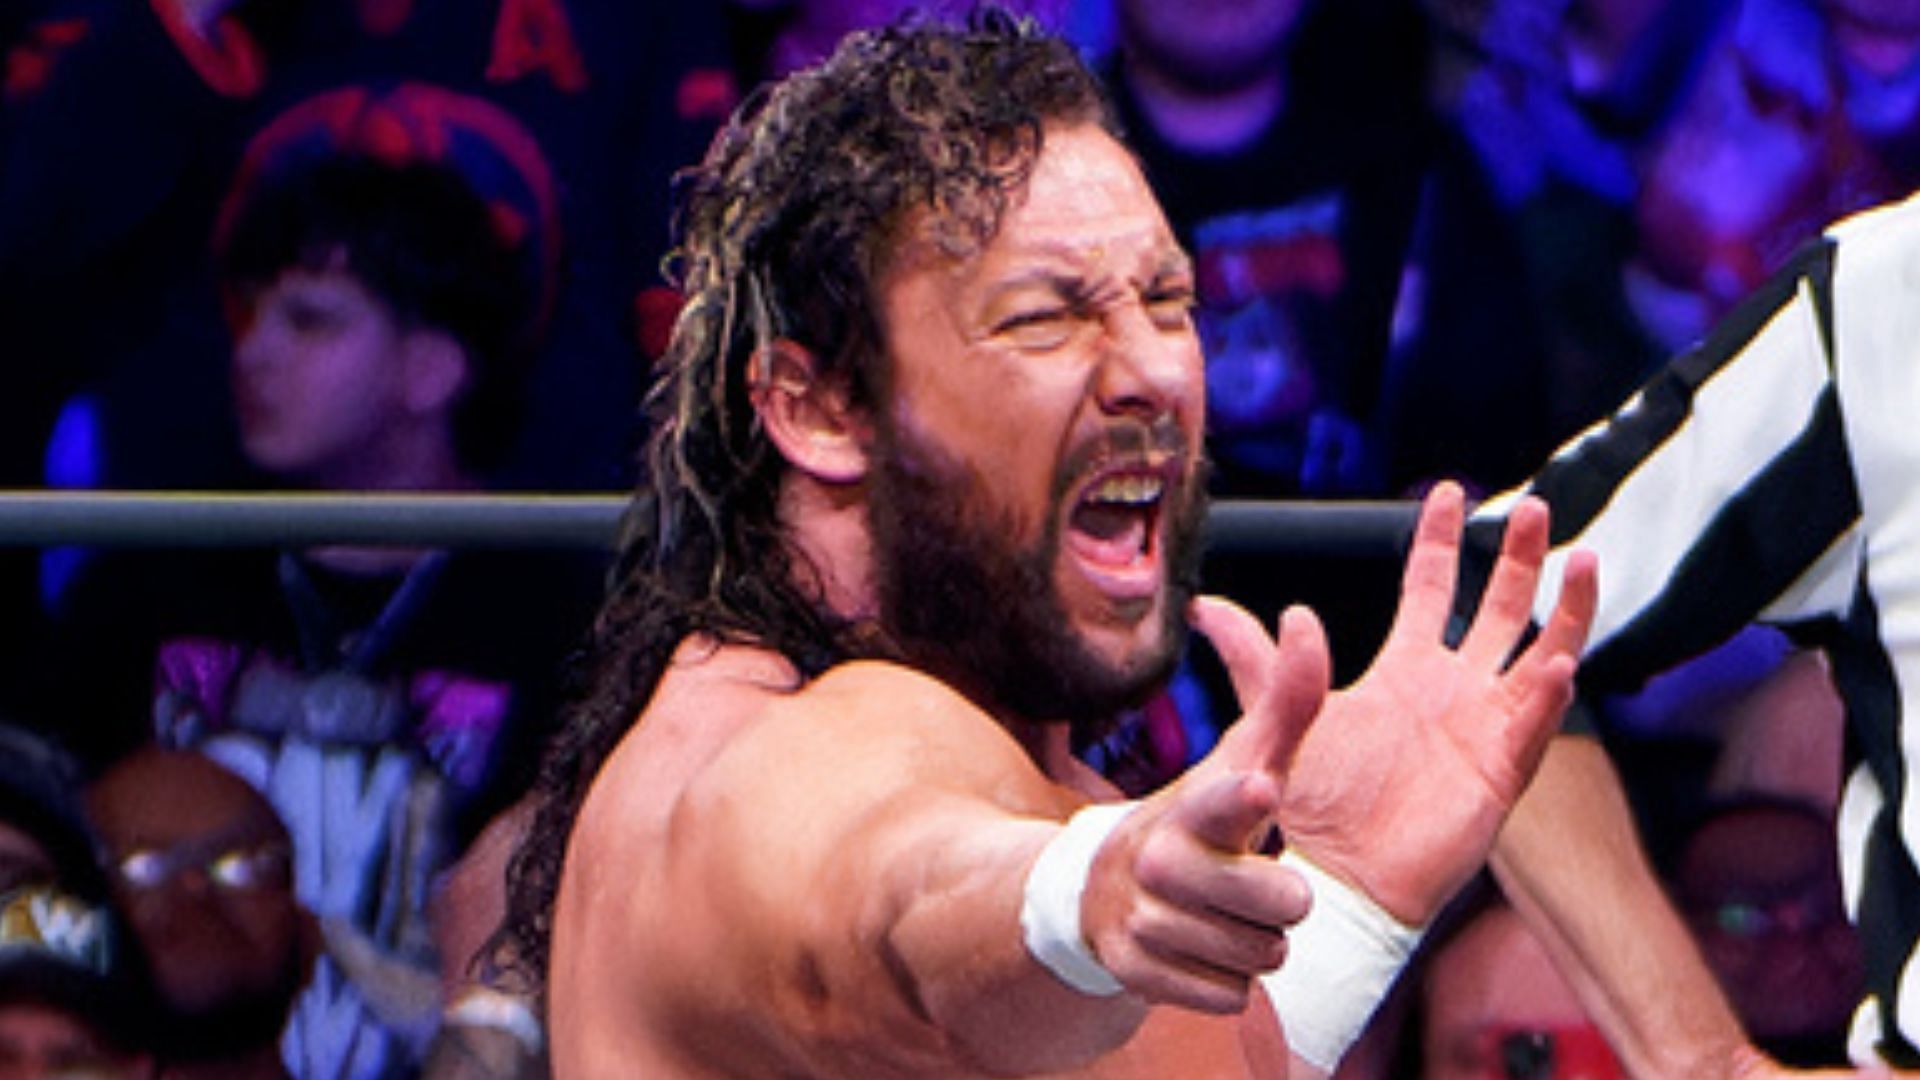 Potential update on identity of Kenny Omega’s friend rumored to sign with AEW – Reports